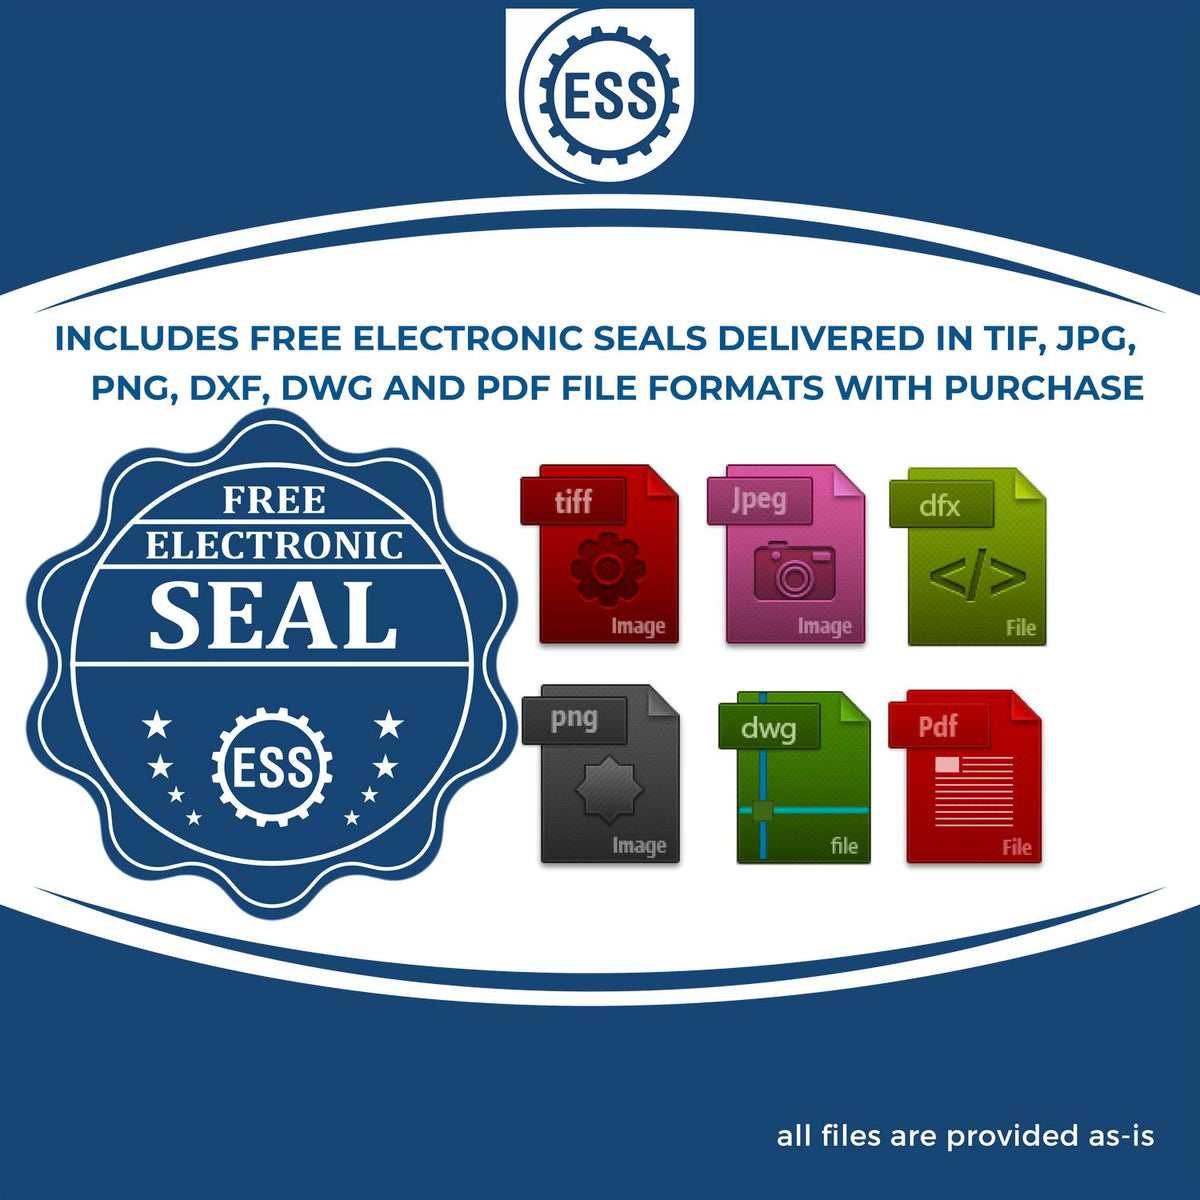 An infographic for the free electronic seal for the Slim Pre-Inked Louisiana Professional Engineer Seal Stamp illustrating the different file type icons such as DXF, DWG, TIF, JPG and PNG.